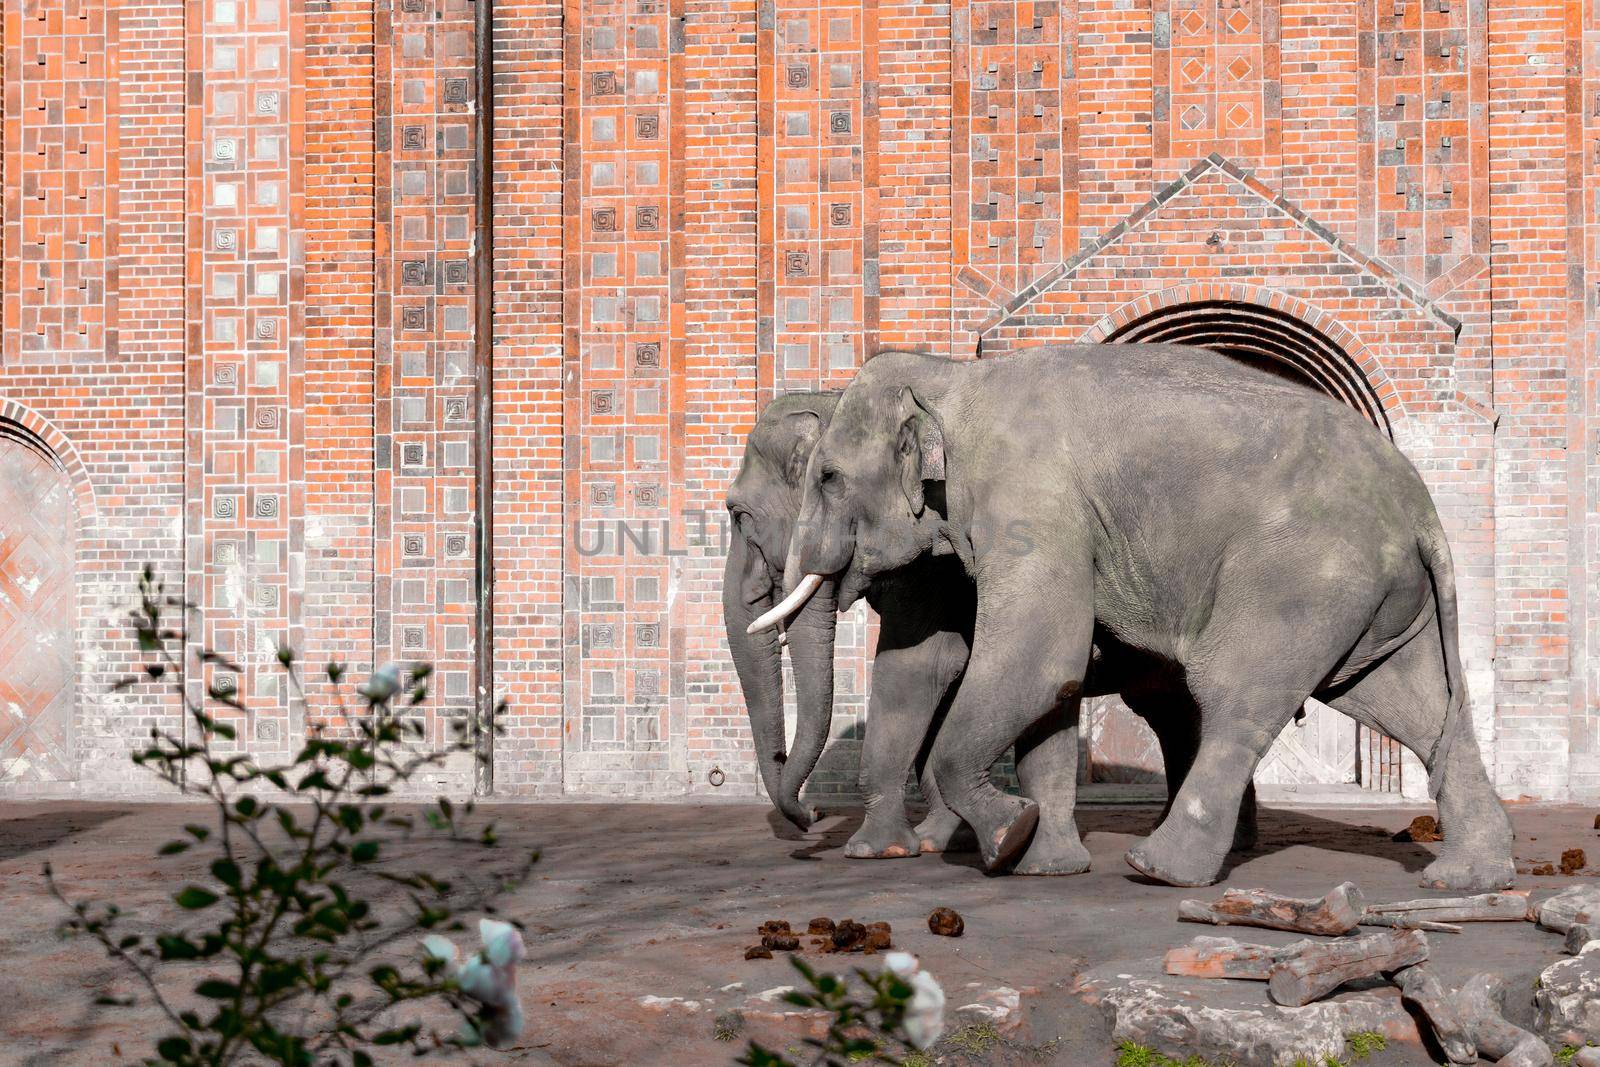 Two Elefant Walking In The Zoo - Wall Backgroud. High quality photo